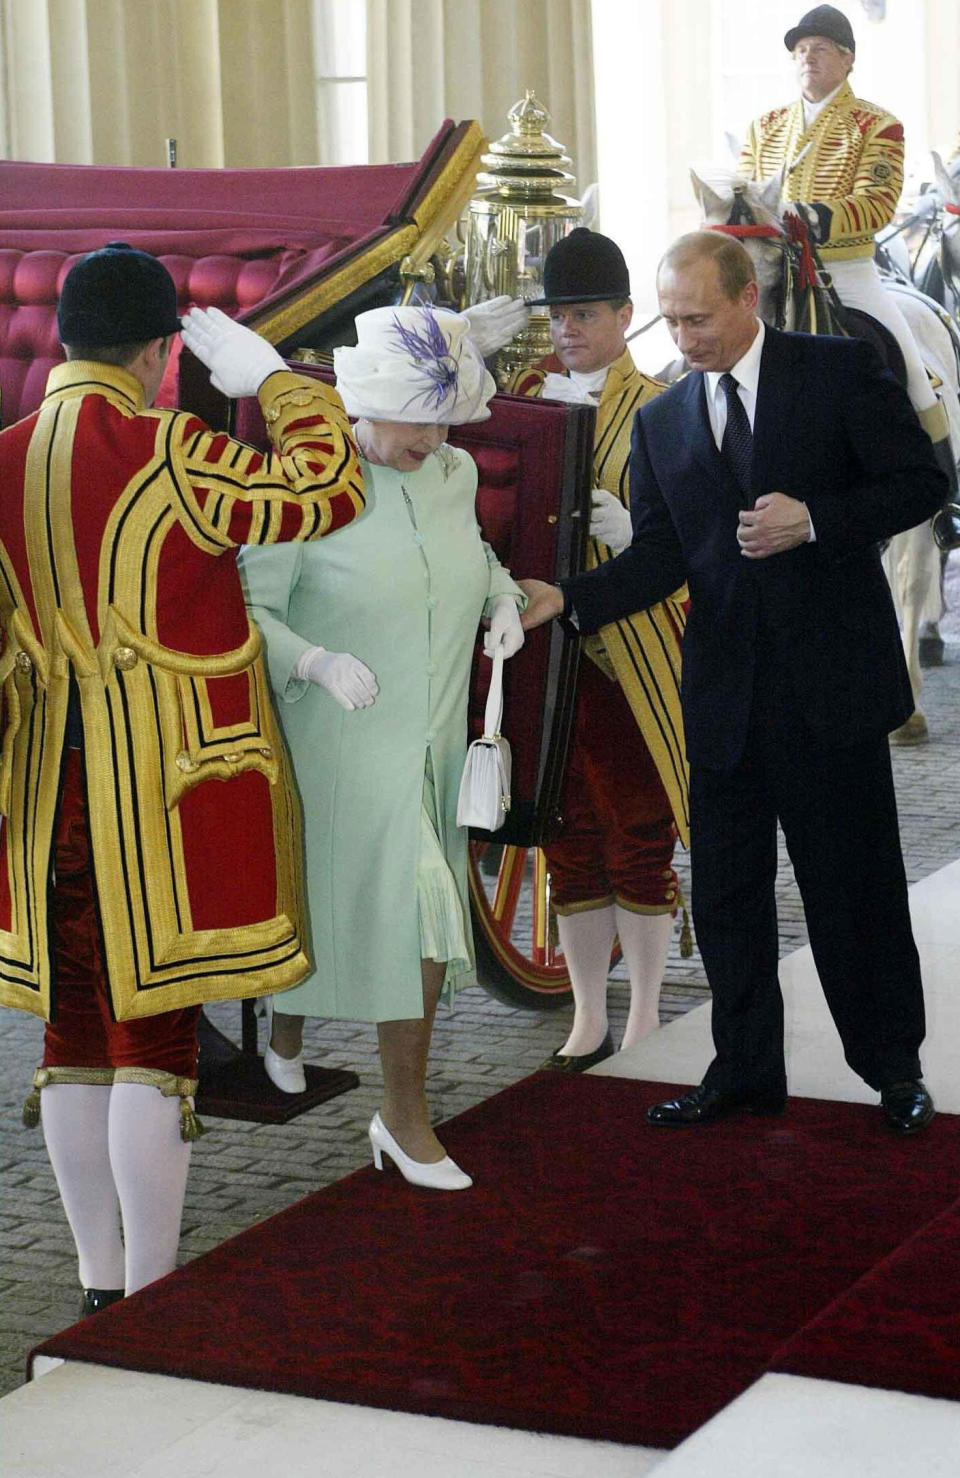 Britain's Queen Elizabeth II and Russian President Vladimir Putin arrive at Buckingham Palace, London, on the first day of his state visit. It is the first state visit by a Russian leader since the days of the Tsars.  